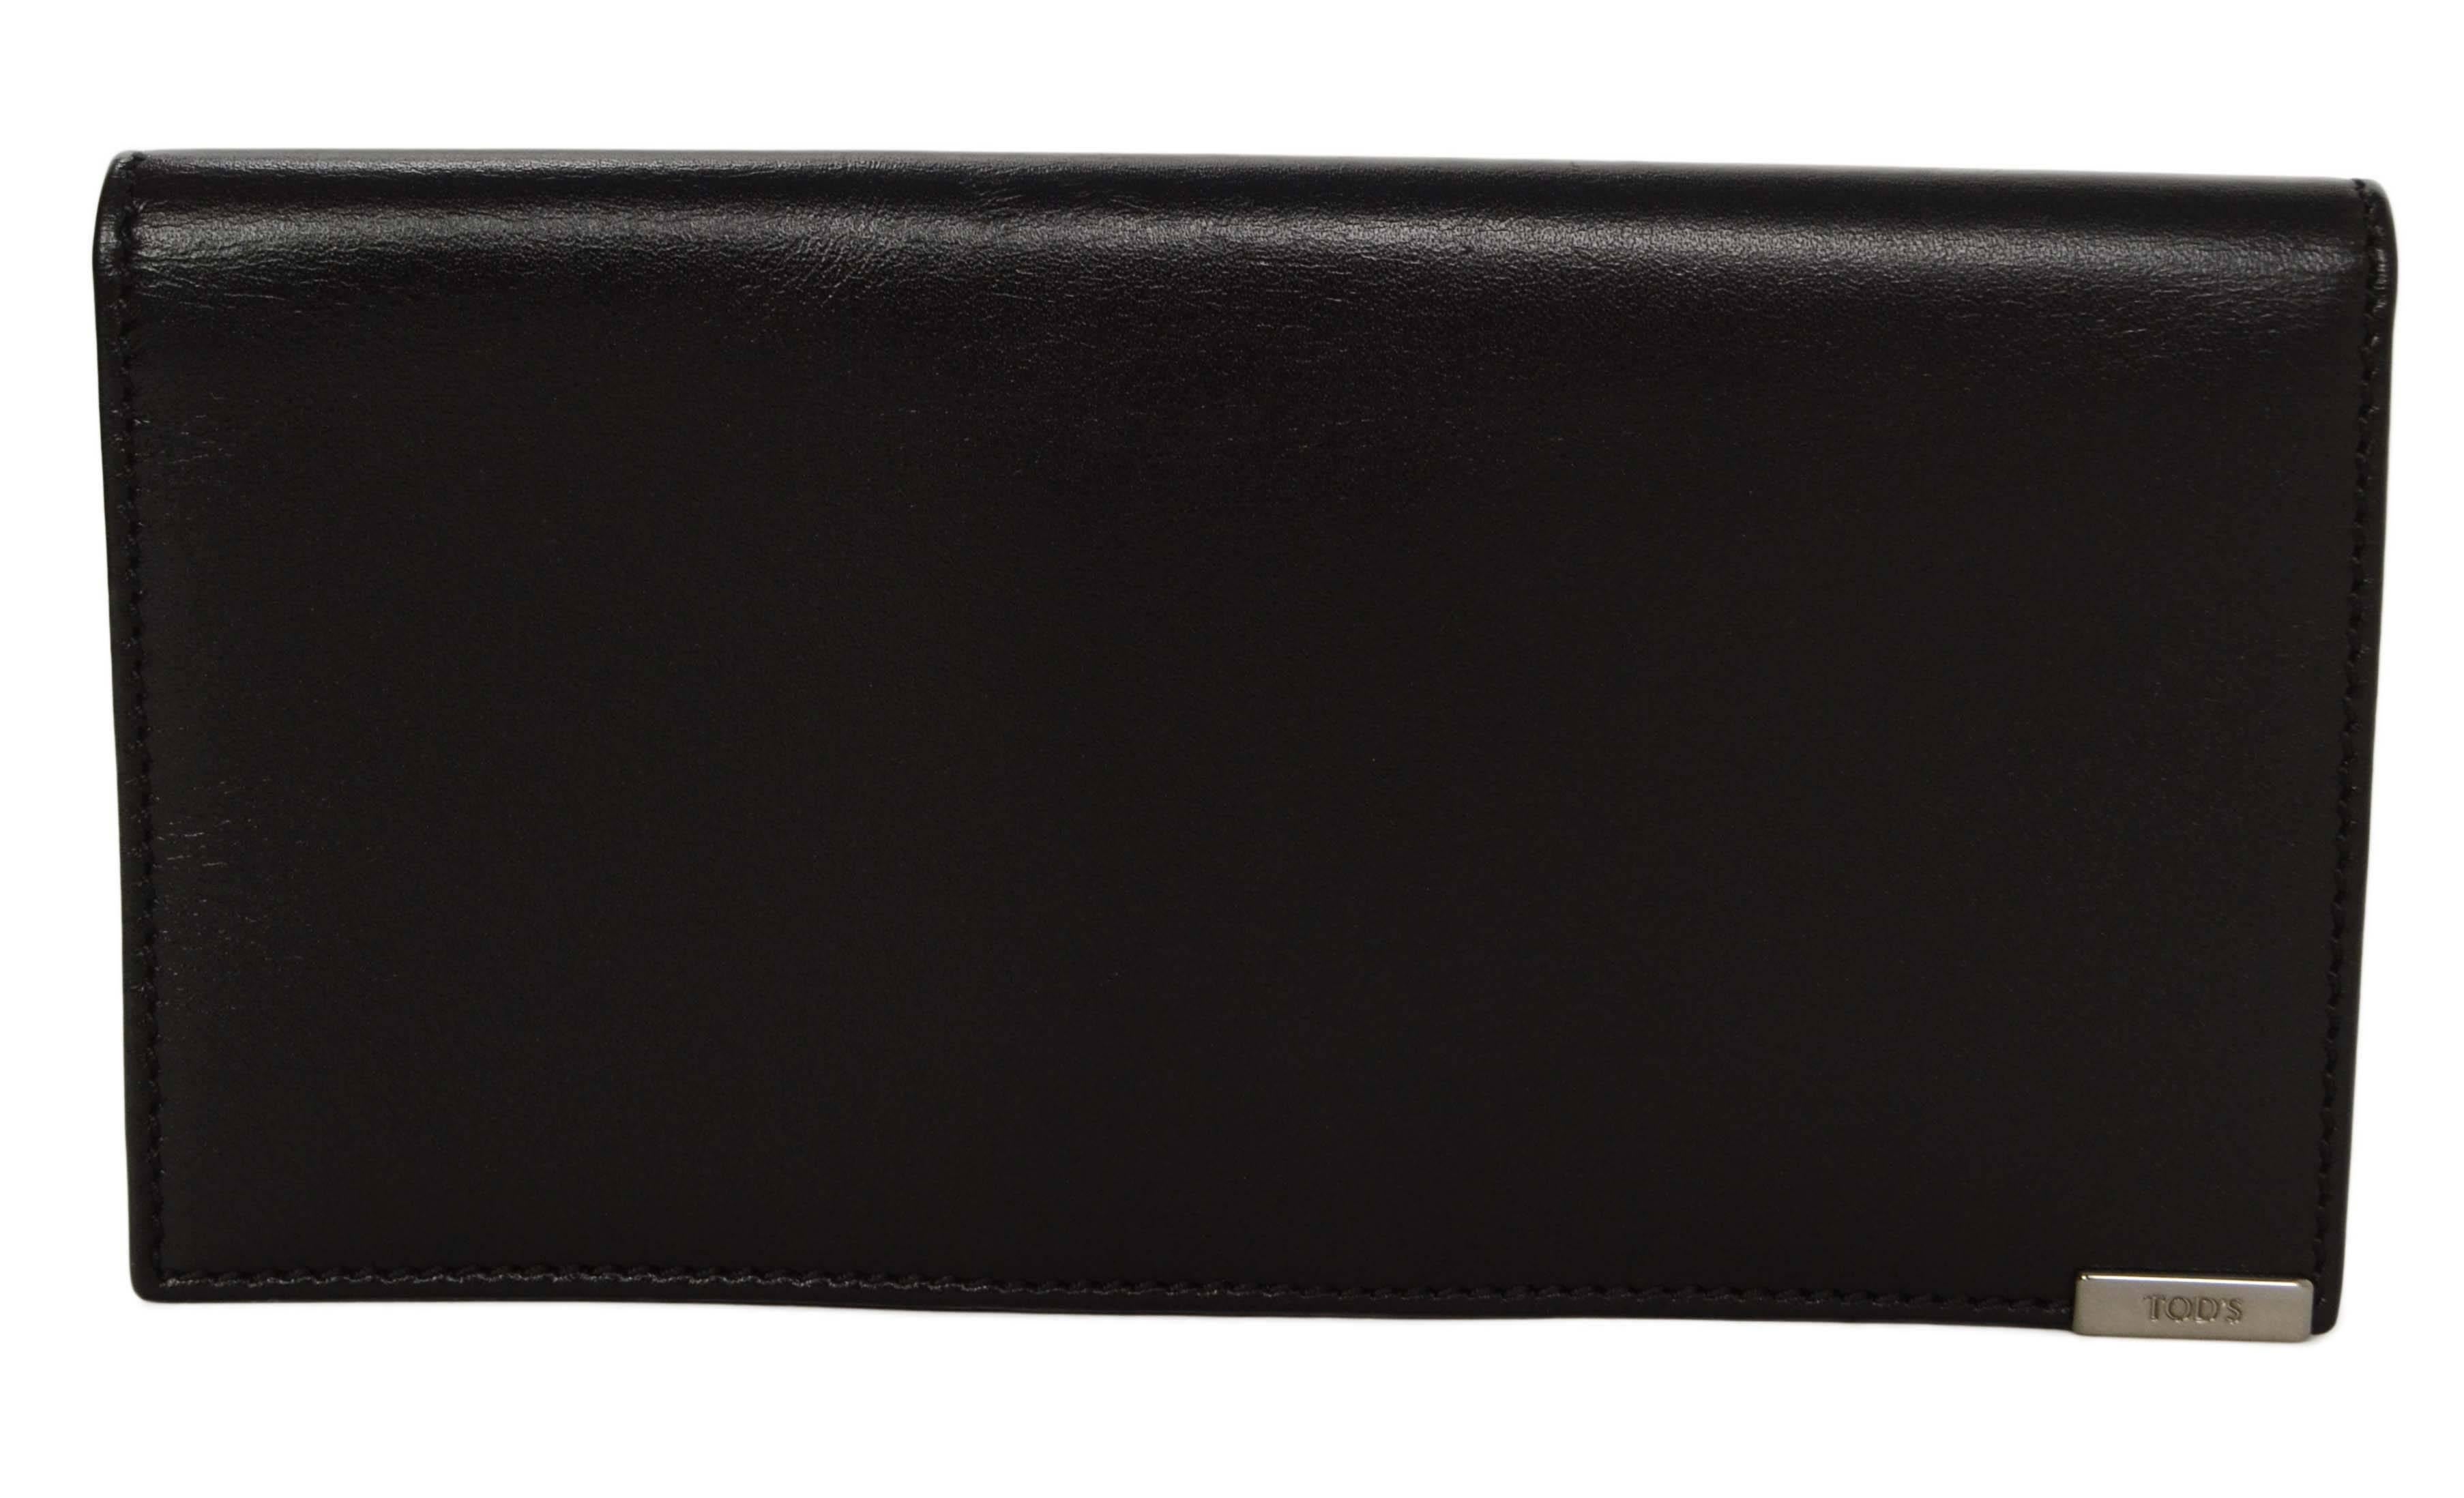 Tod's Black Leather Long Open Wallet 
Features small silvertone plate on back corner with Tod's engraved

Made In: Italy
Color: Black
Hardware: None
Materials: Leather
Closure/Opening: Bi-fold
Exterior Pockets: None
Interior Pockets: One